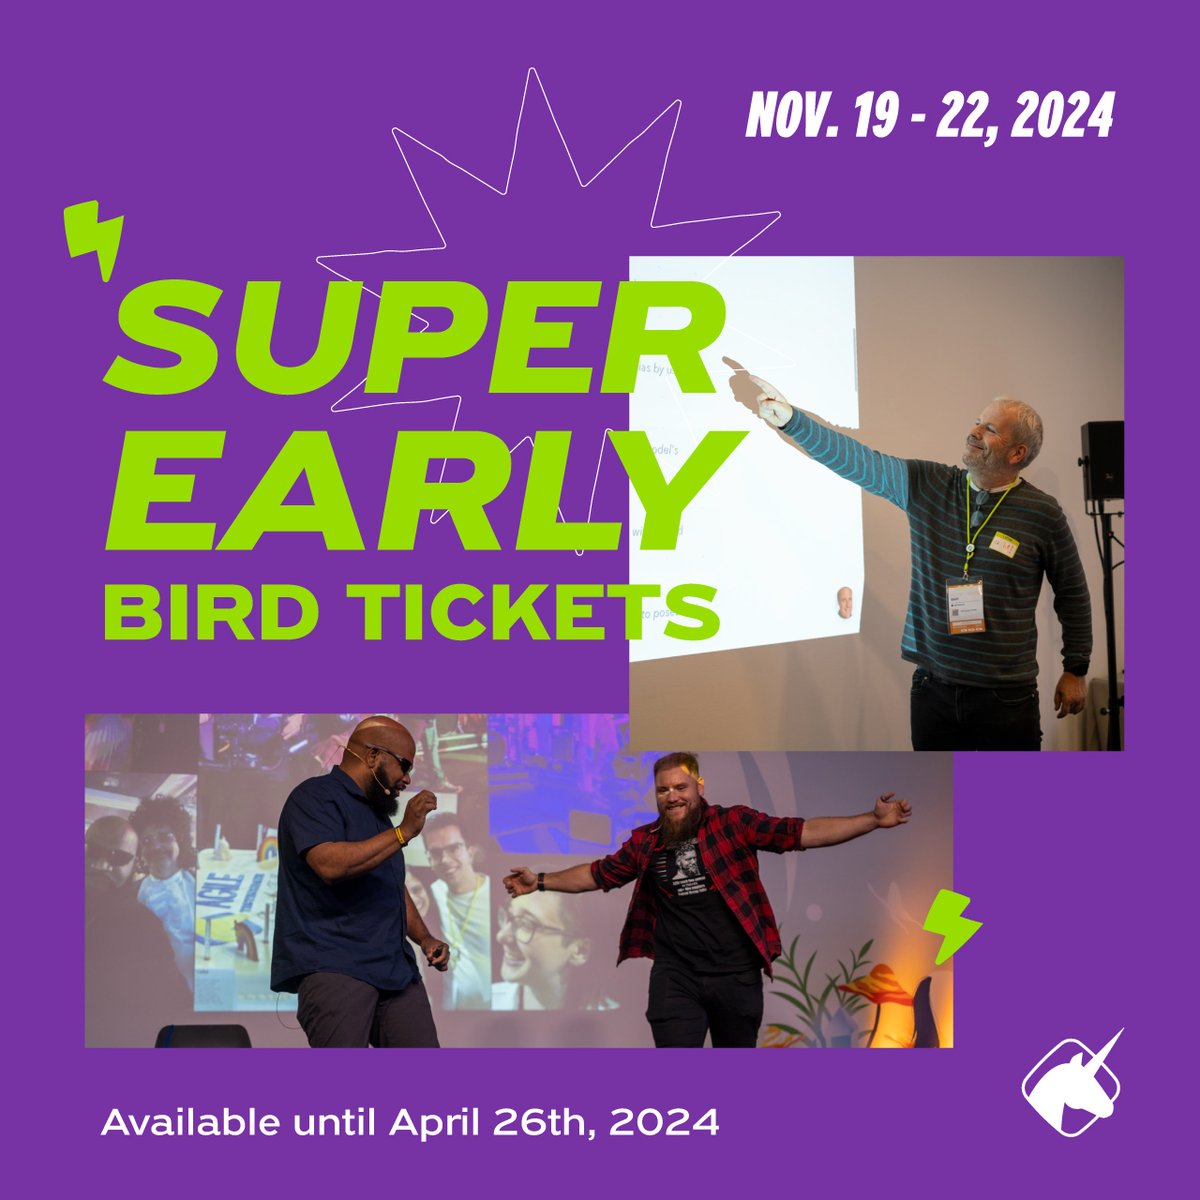 Last call for savings! Today is your final chance to save big with our Super Early Bird discount - €525 in savings await! Grab your ticket before it's gone: bit.ly/3ROclHA